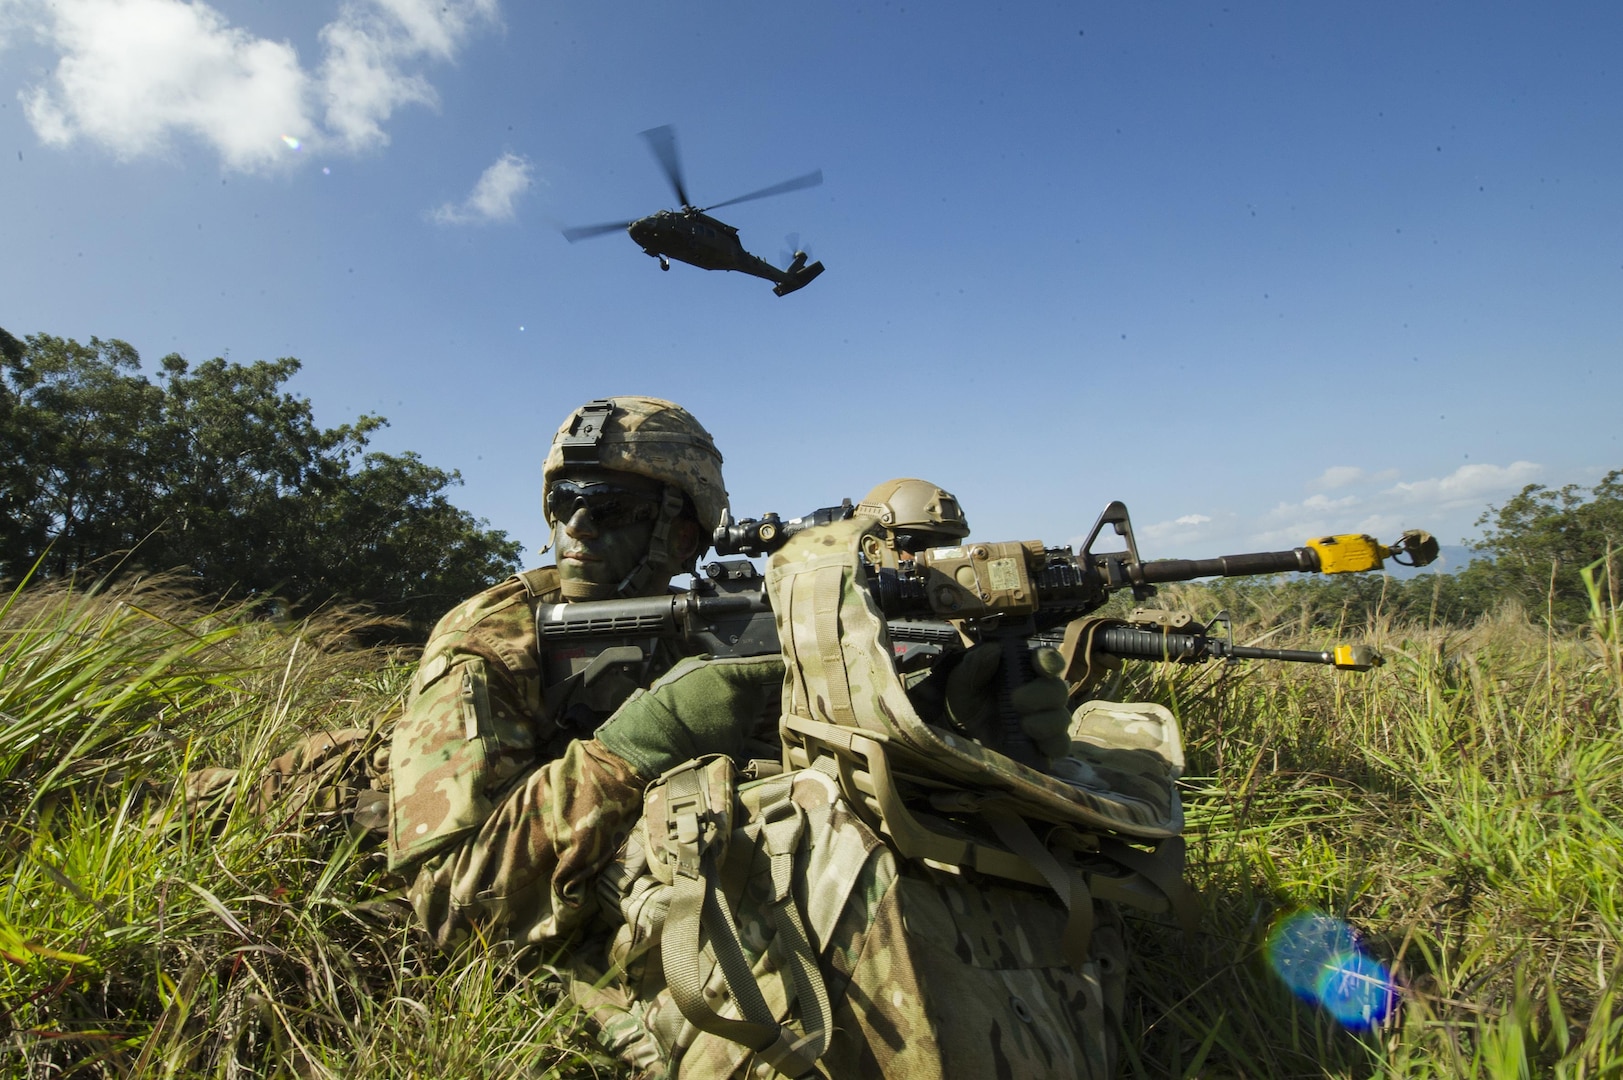 U.S. Army 1st Lt. Joseph Ross, 2nd Platoon, Alpha Company, 29th Engineer Battalion, 3rd Brigade, 25th Infantry Division, provides security after exiting a U.S. Army Black Hawk during a tactical insertion as part of the 25th ID Lightning Academy’s Jungle Operations Training Center (JOTC) patrol day one March 23, 2016, at the East Range Training Center, Hawaii. Students who attend the JOTC training course learn how to operate in a jungle environment learning skills focused on survival, communication, navigation, waterborne and patrol base operations. Ross grew up in York, Pennsylvania and attributes stories he heard from his grandfather, a World War II veteran, in his decision to join the military. (U.S. Air Force photo by Staff Sgt. Christopher Hubenthal)